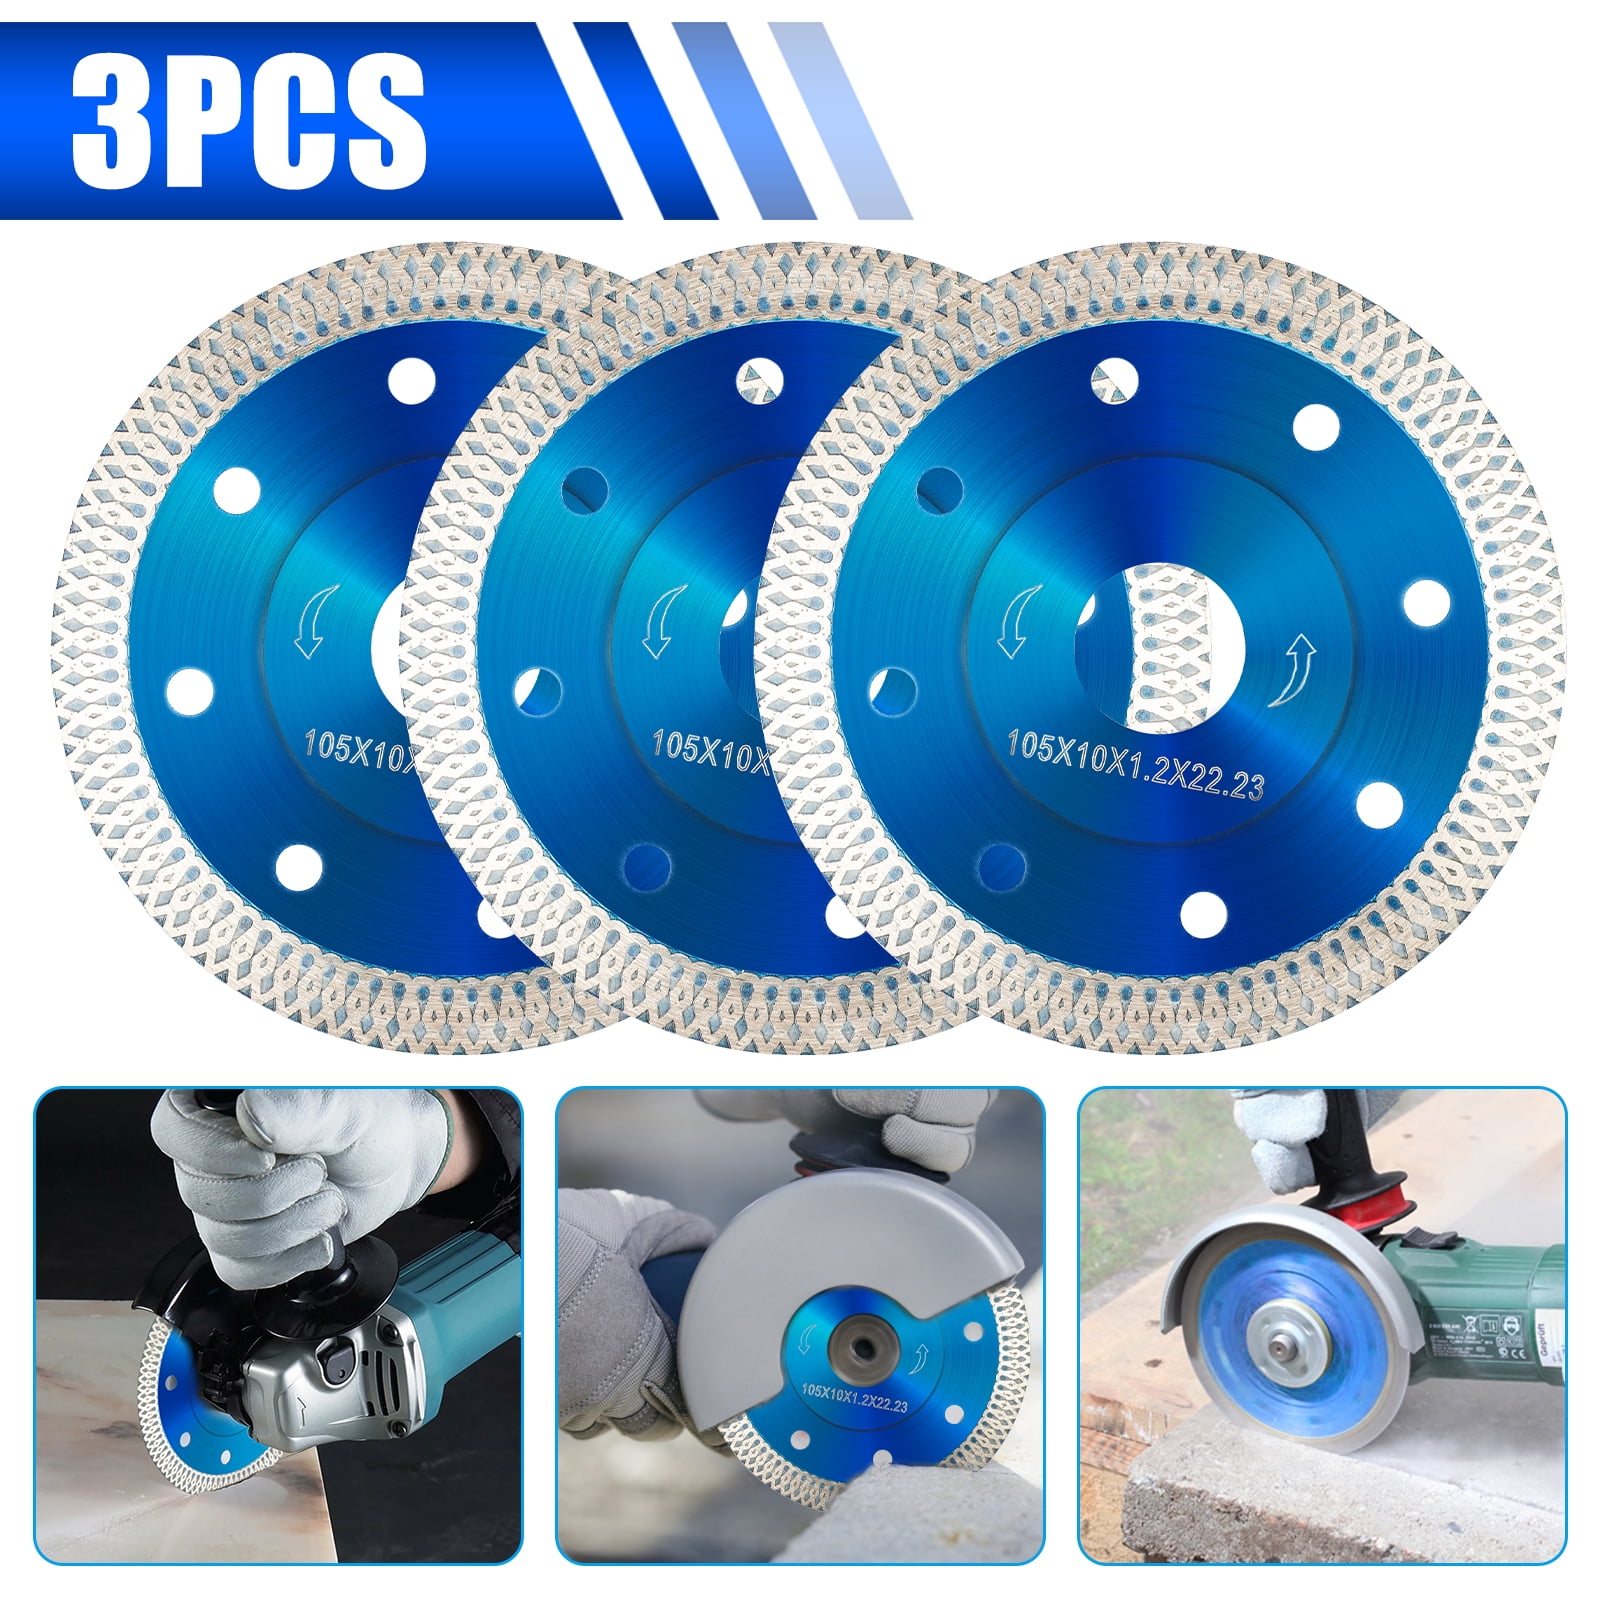 5 Inch Diamond Cutting Disc Grinder Blade for Stone Ceramics Marble 7/8" Hole 